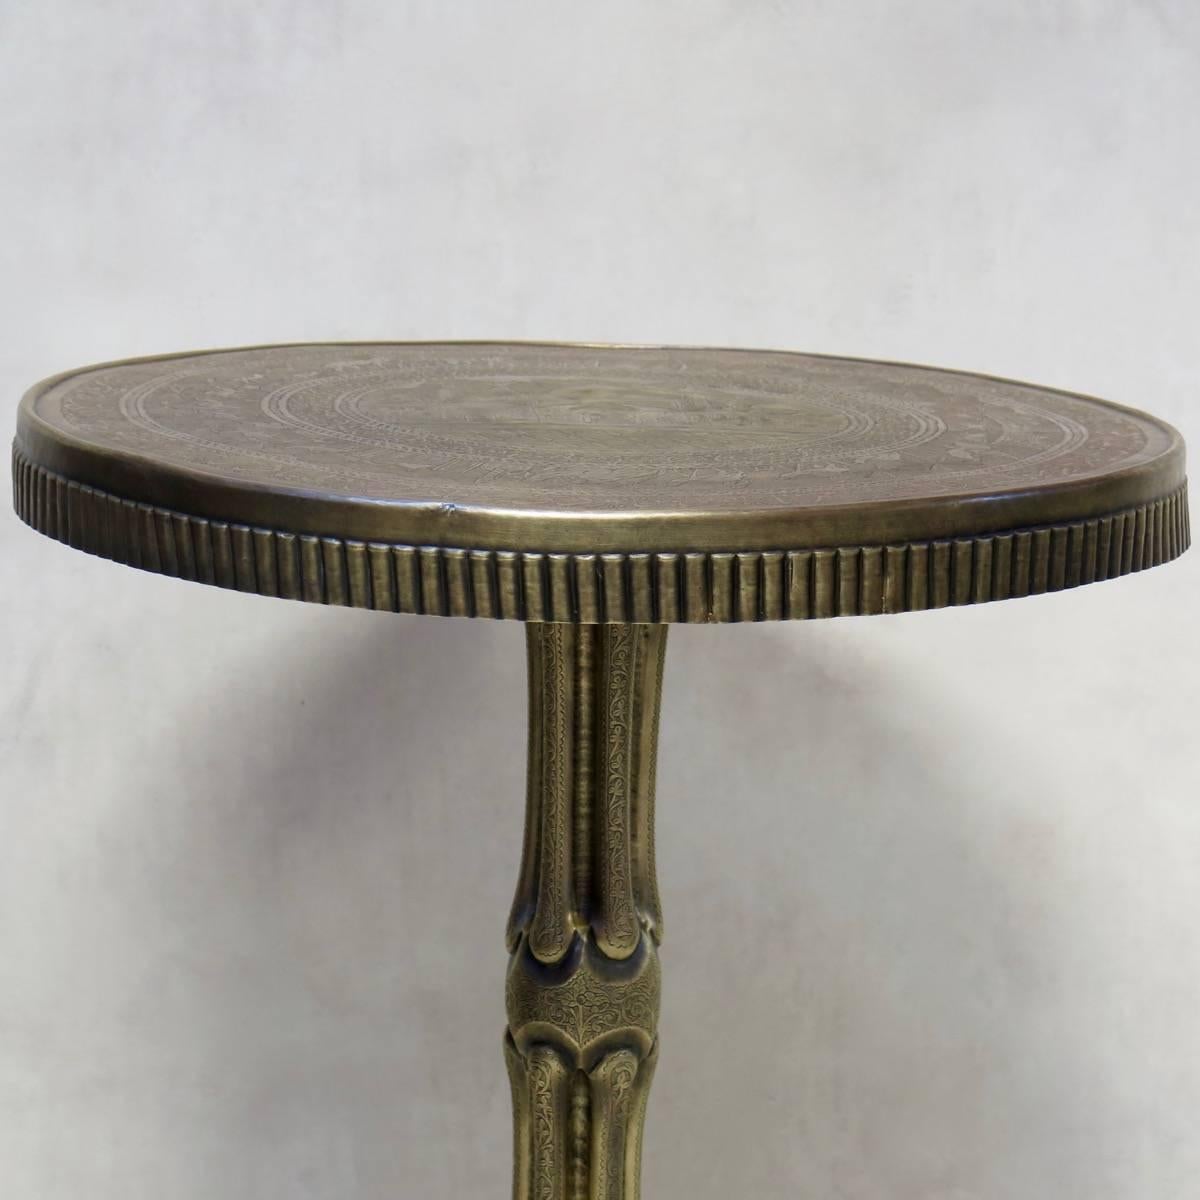 Finely-wrought copper gueridon from Tripoli, with an elegant stem base, and a decorated top. Stamped on the rim of the base.